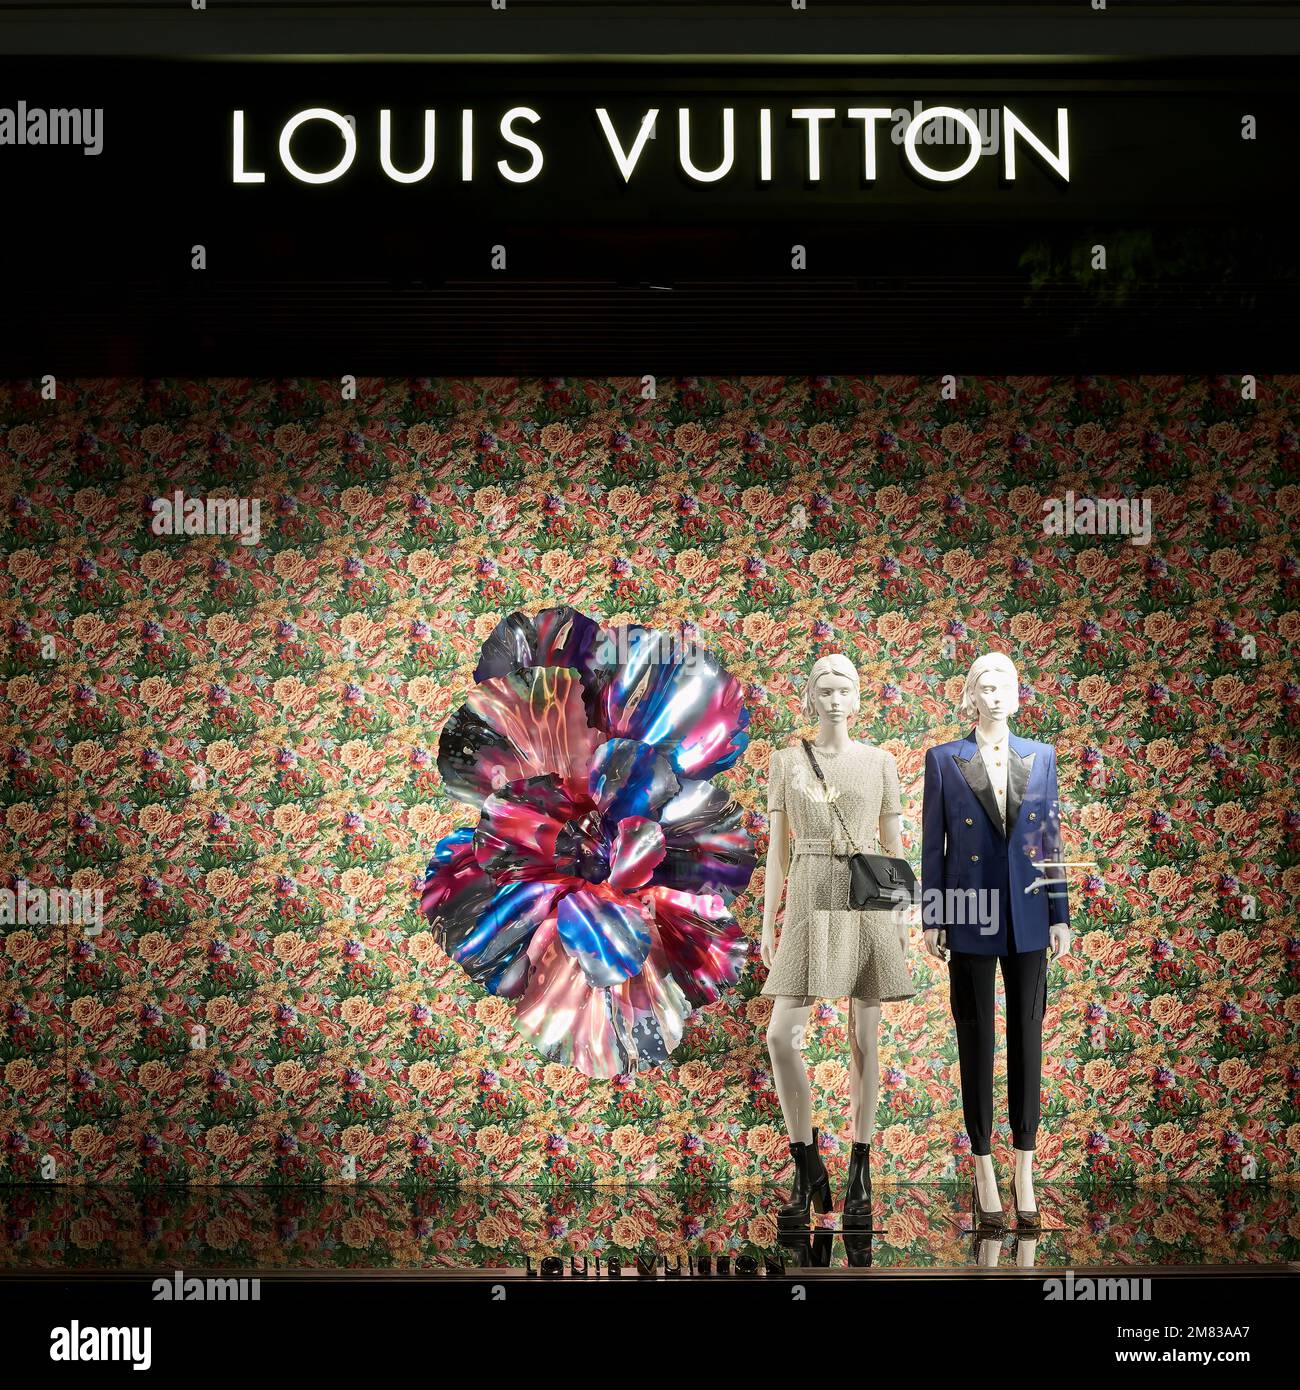 Shop window of luxury goods company Louis Vuitton in a popular shopping street in Berlin at night Stock Photo